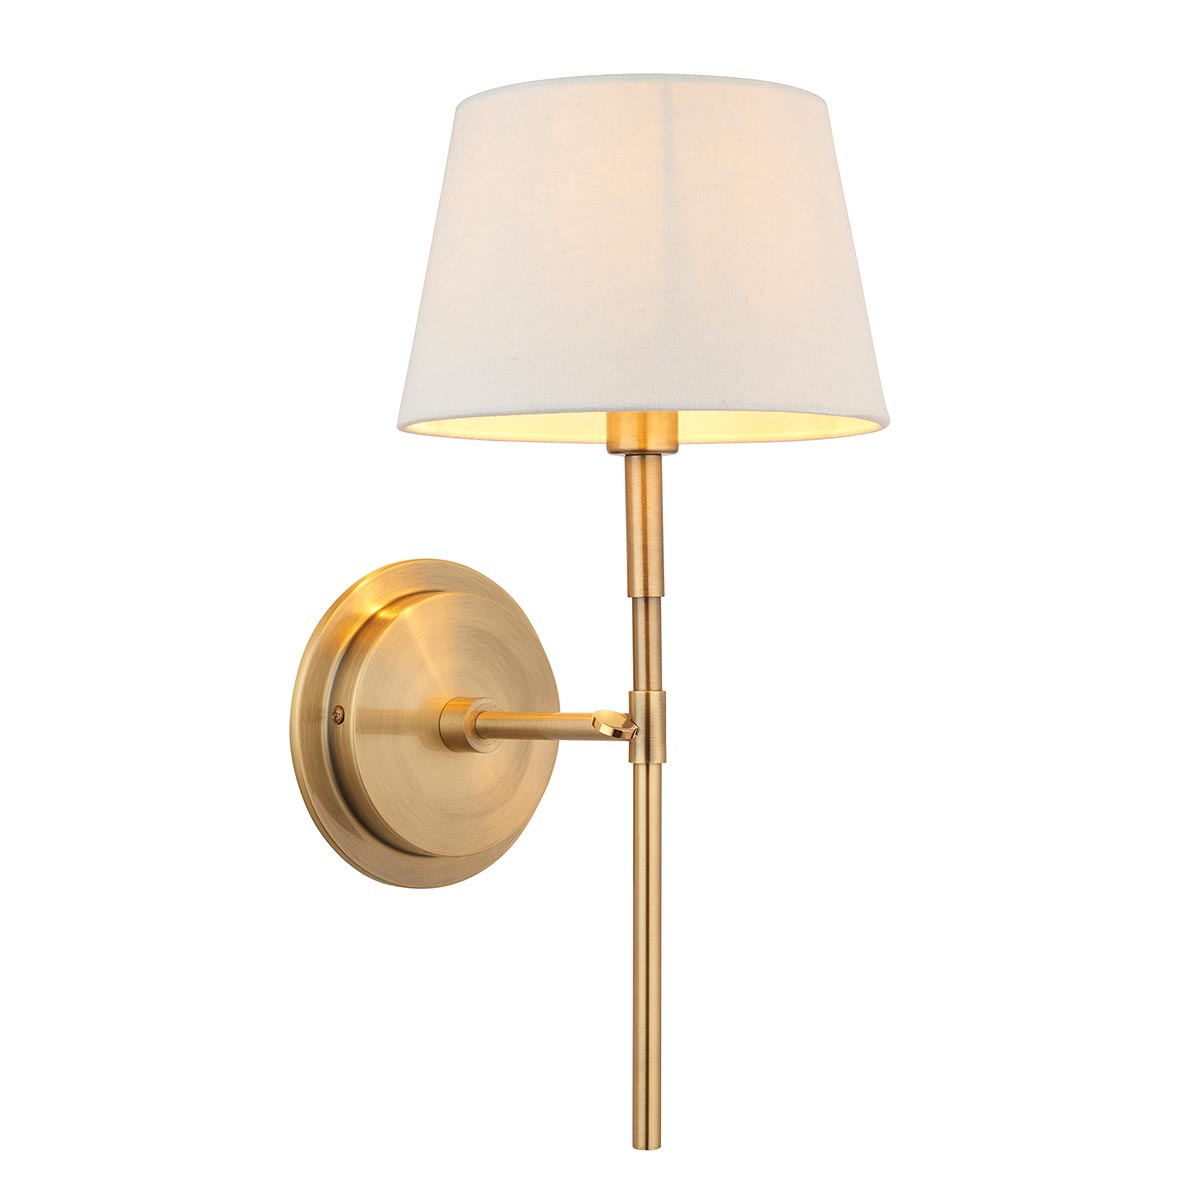 Endon Rennes Antique Brass Wall Light With Ivory Shade 103355